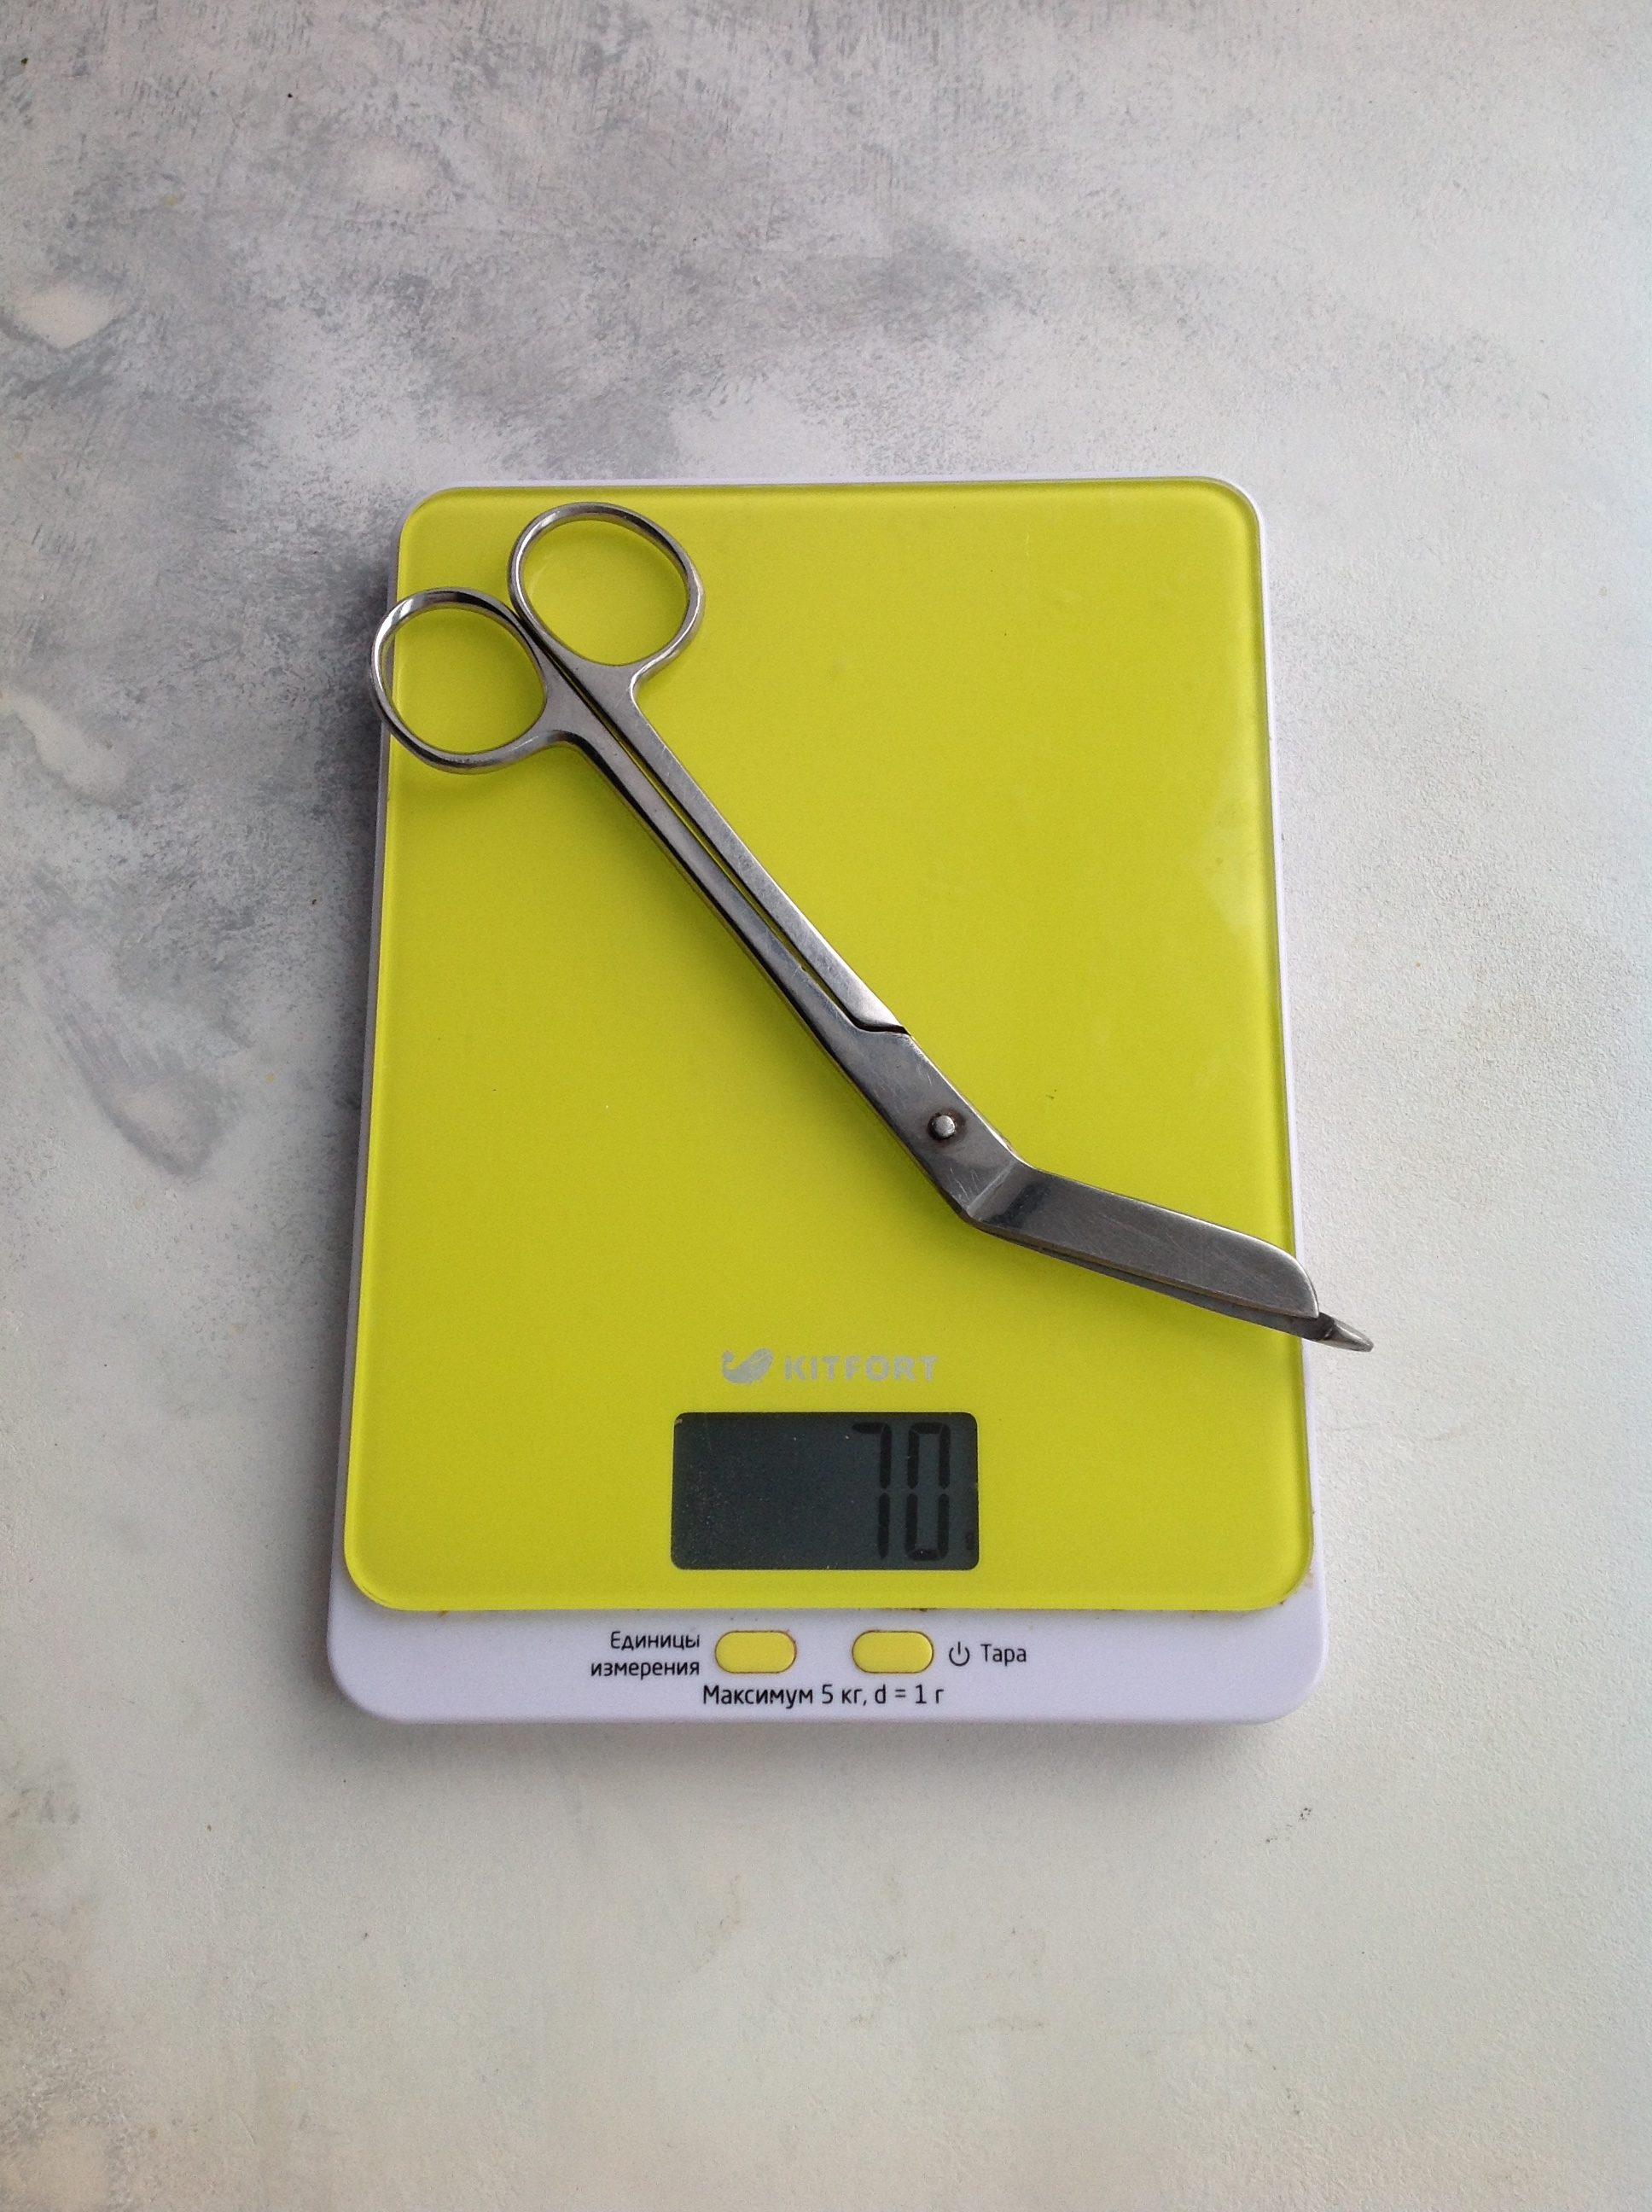 Weight of medical scissors for cutting bandages